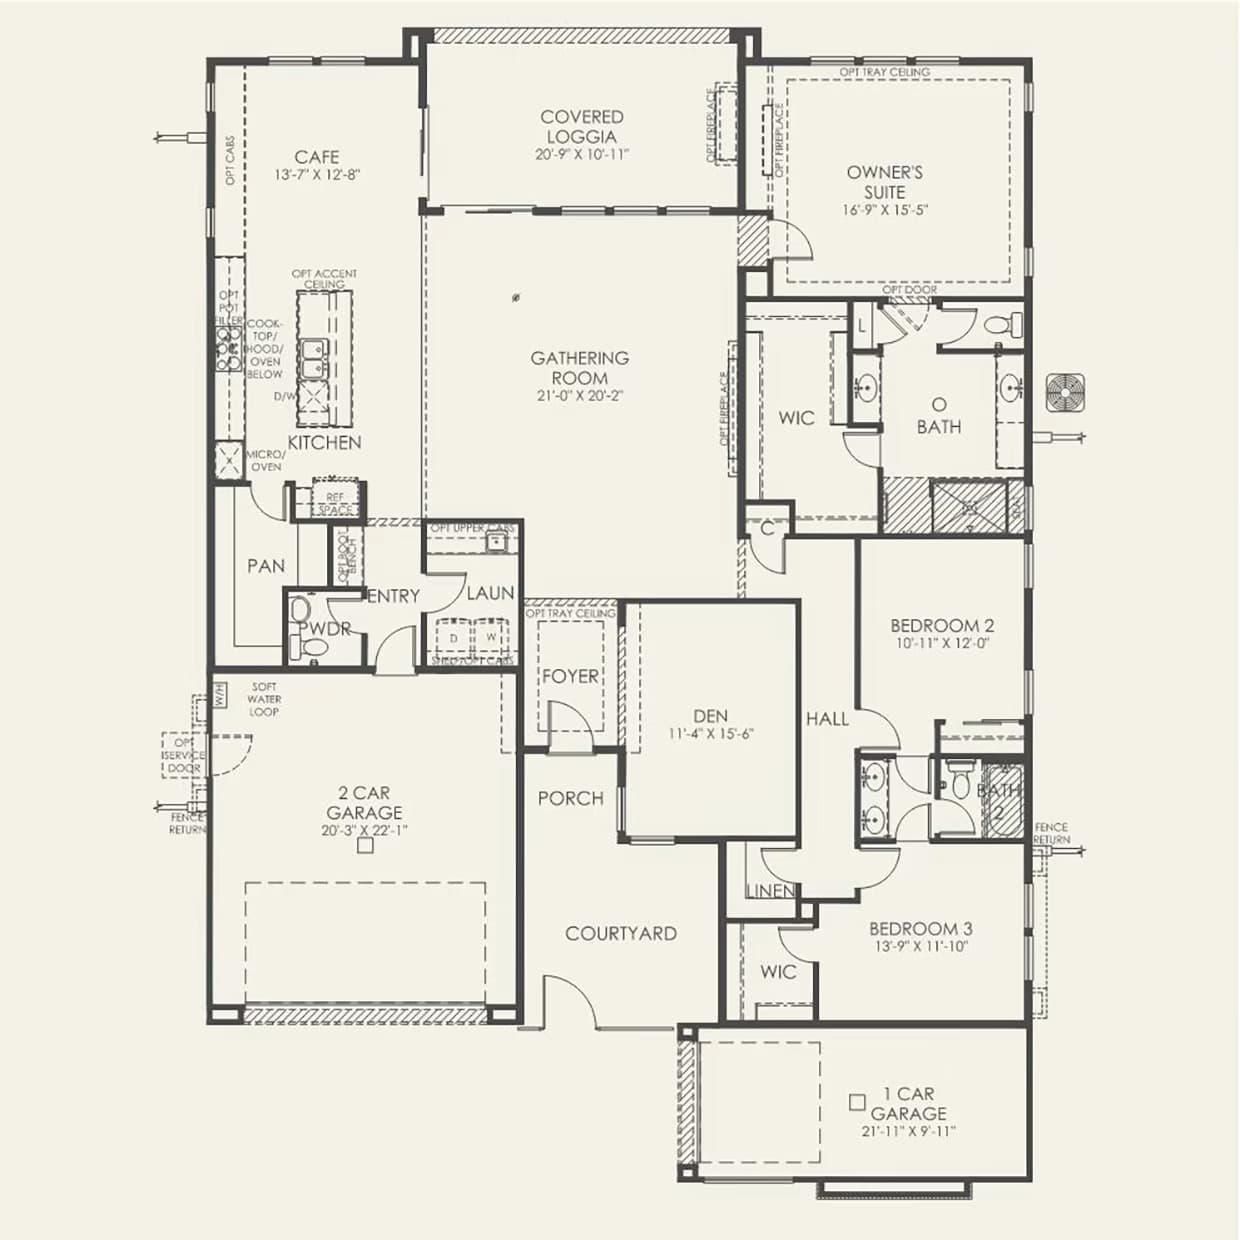 Floorplan of Genoa Model at Ascension by Pulte Homes